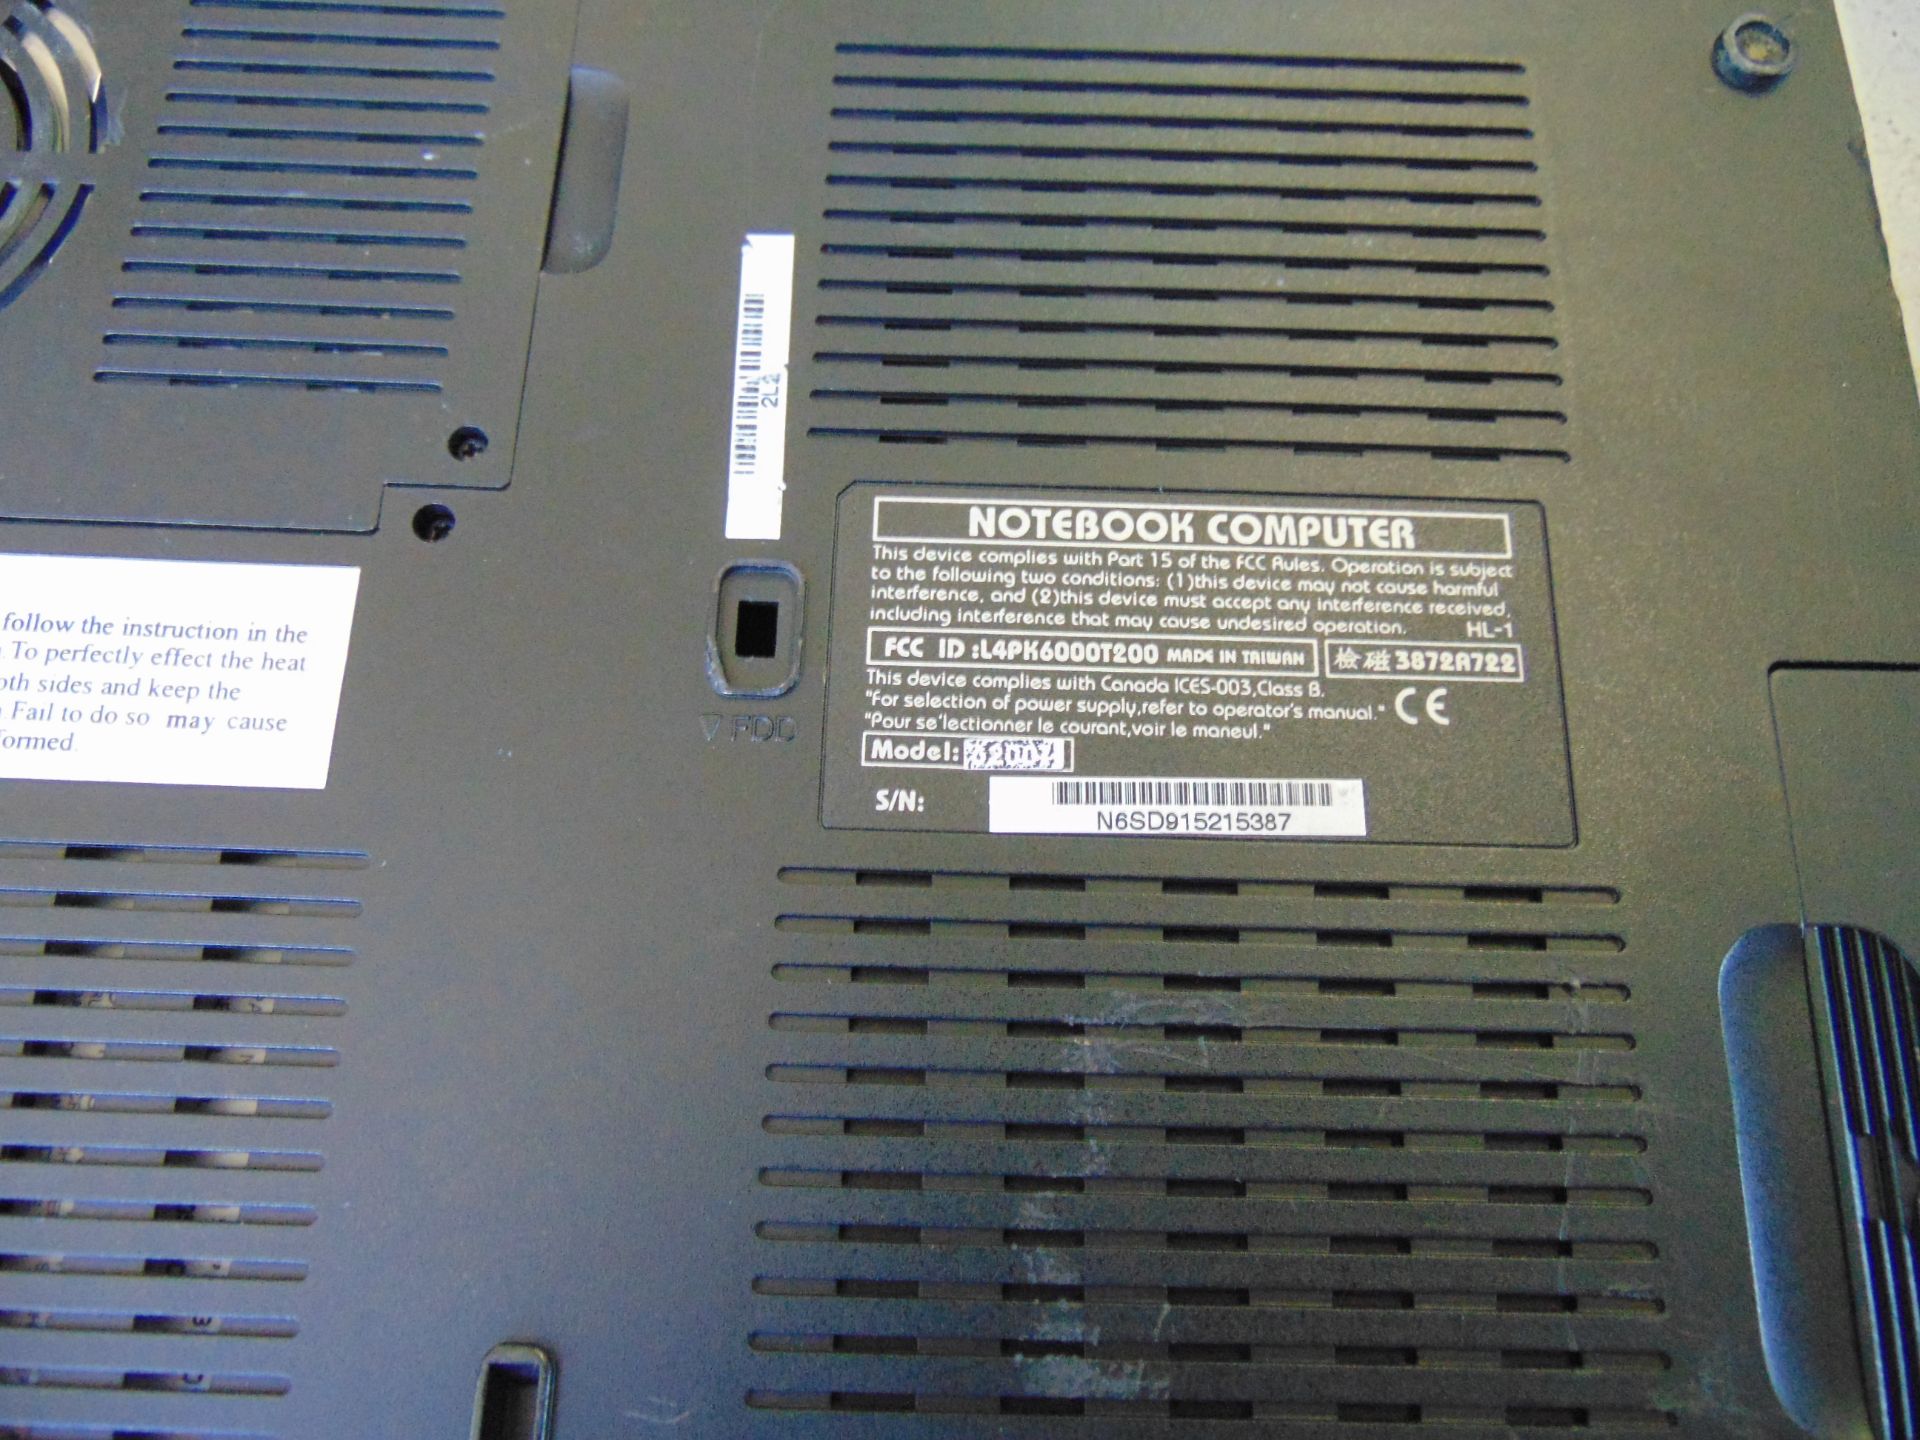 Compaq Notebook PC - Image 3 of 4